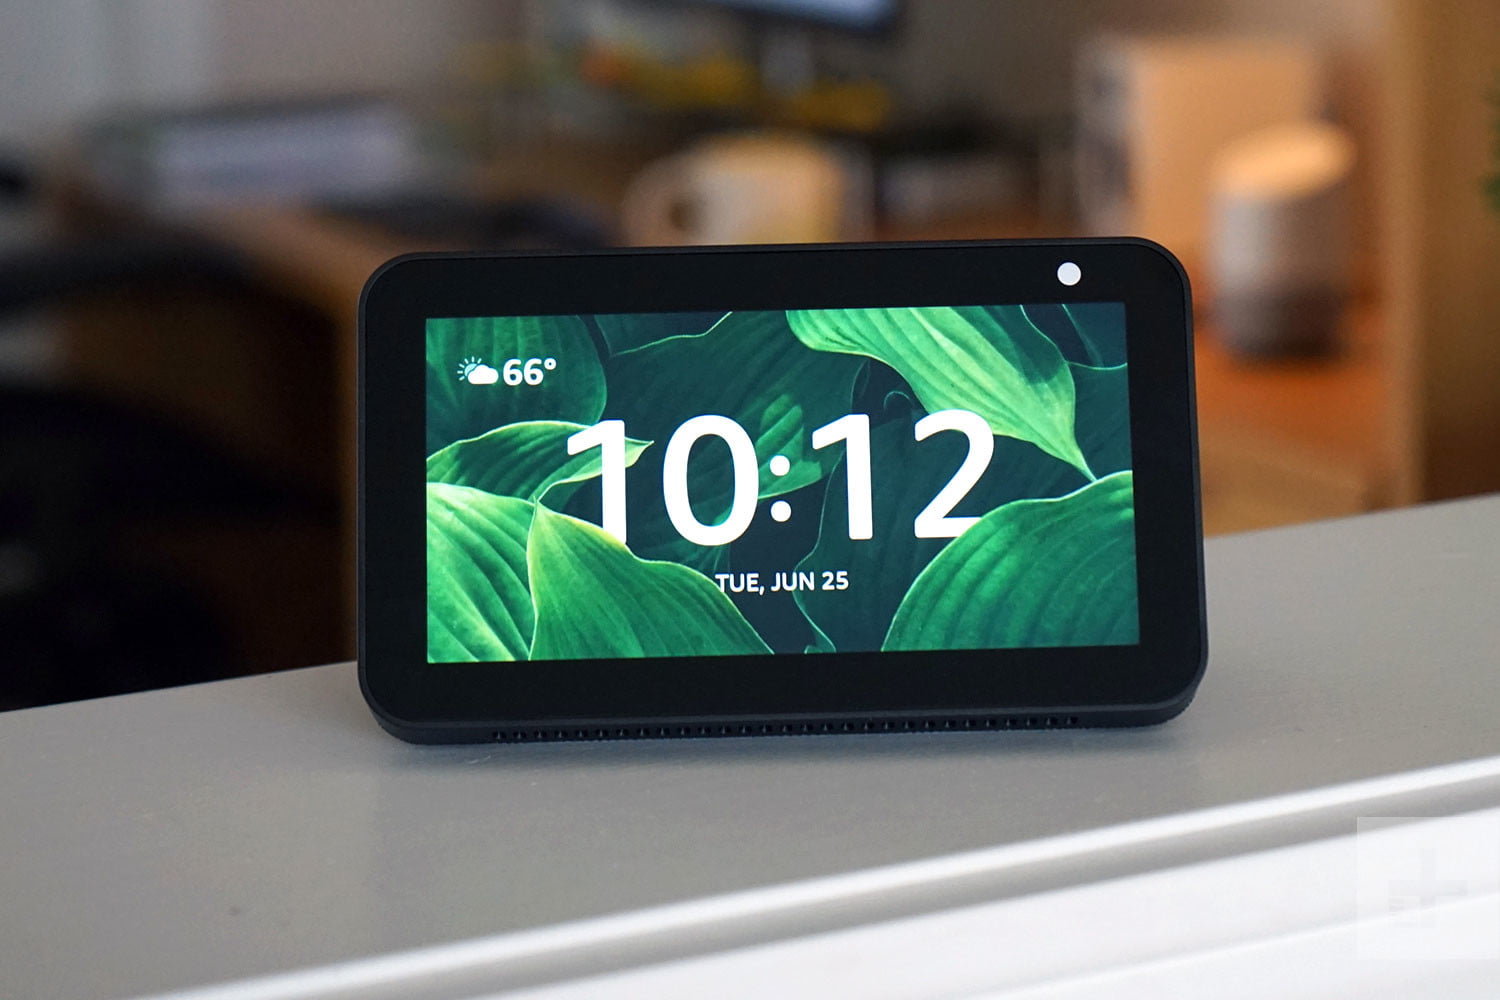 The Amazon Echo Show 5 displaying the time.